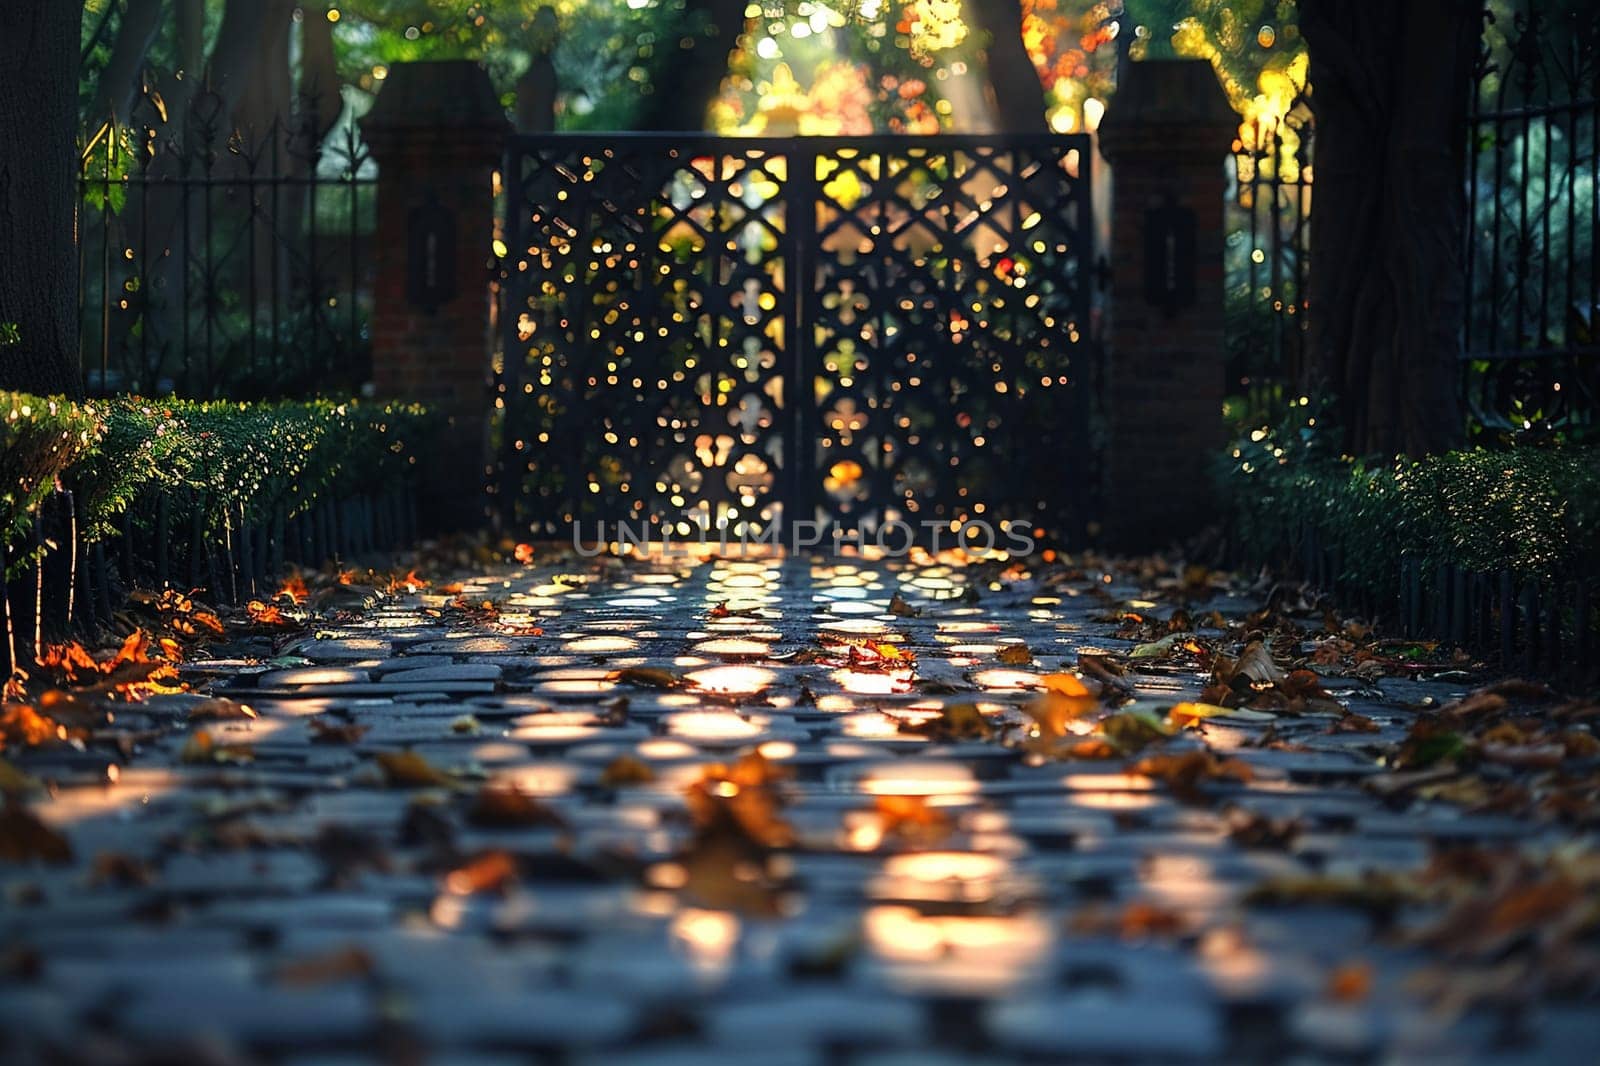 Lacy Shadows Cast by an Intricate Iron Gate, The patterns blur onto the path, the gate's silent storytelling.